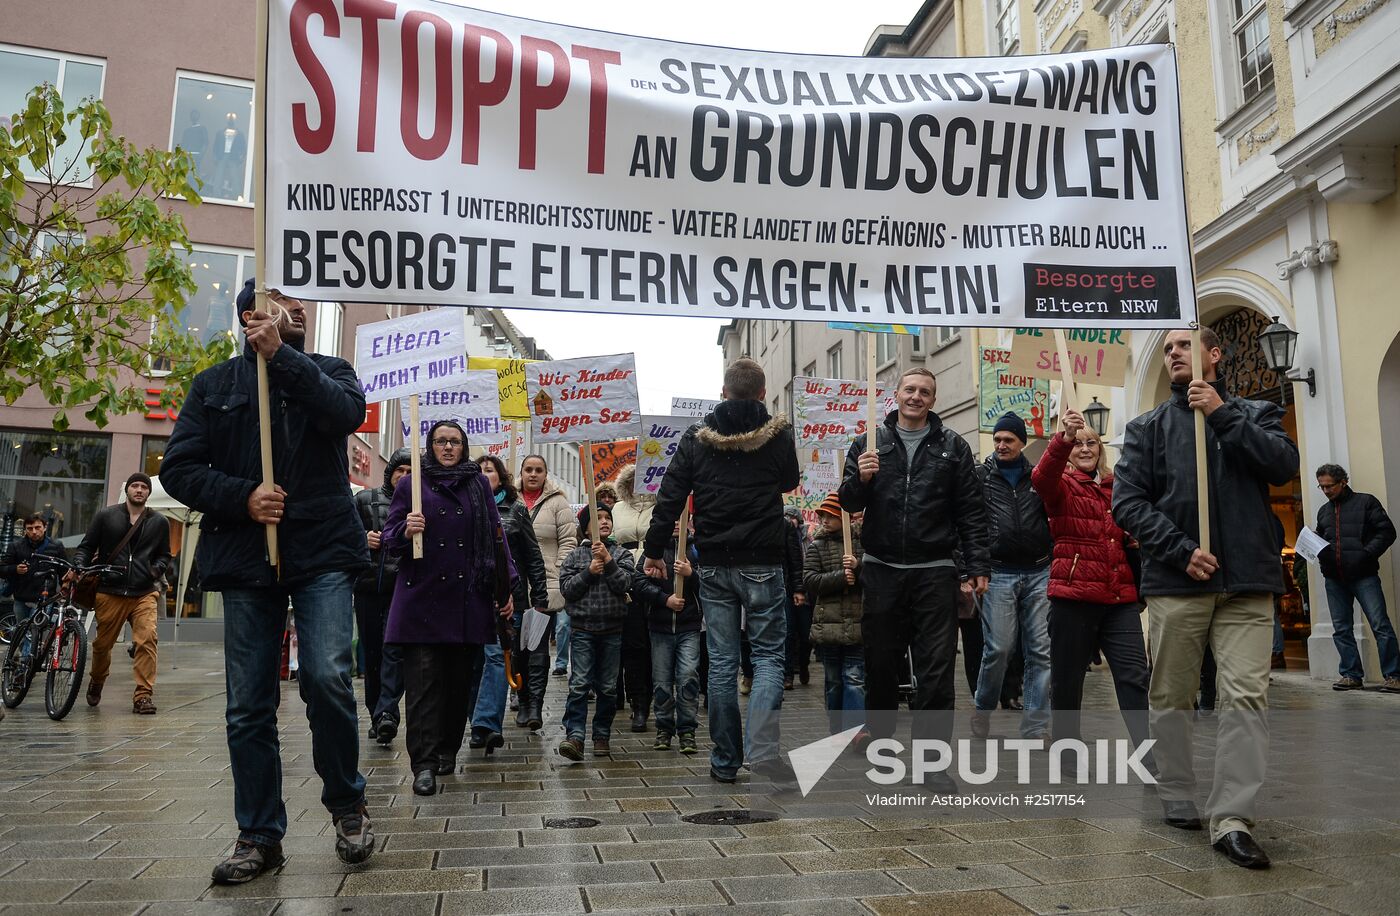 Germans march for traditional family values